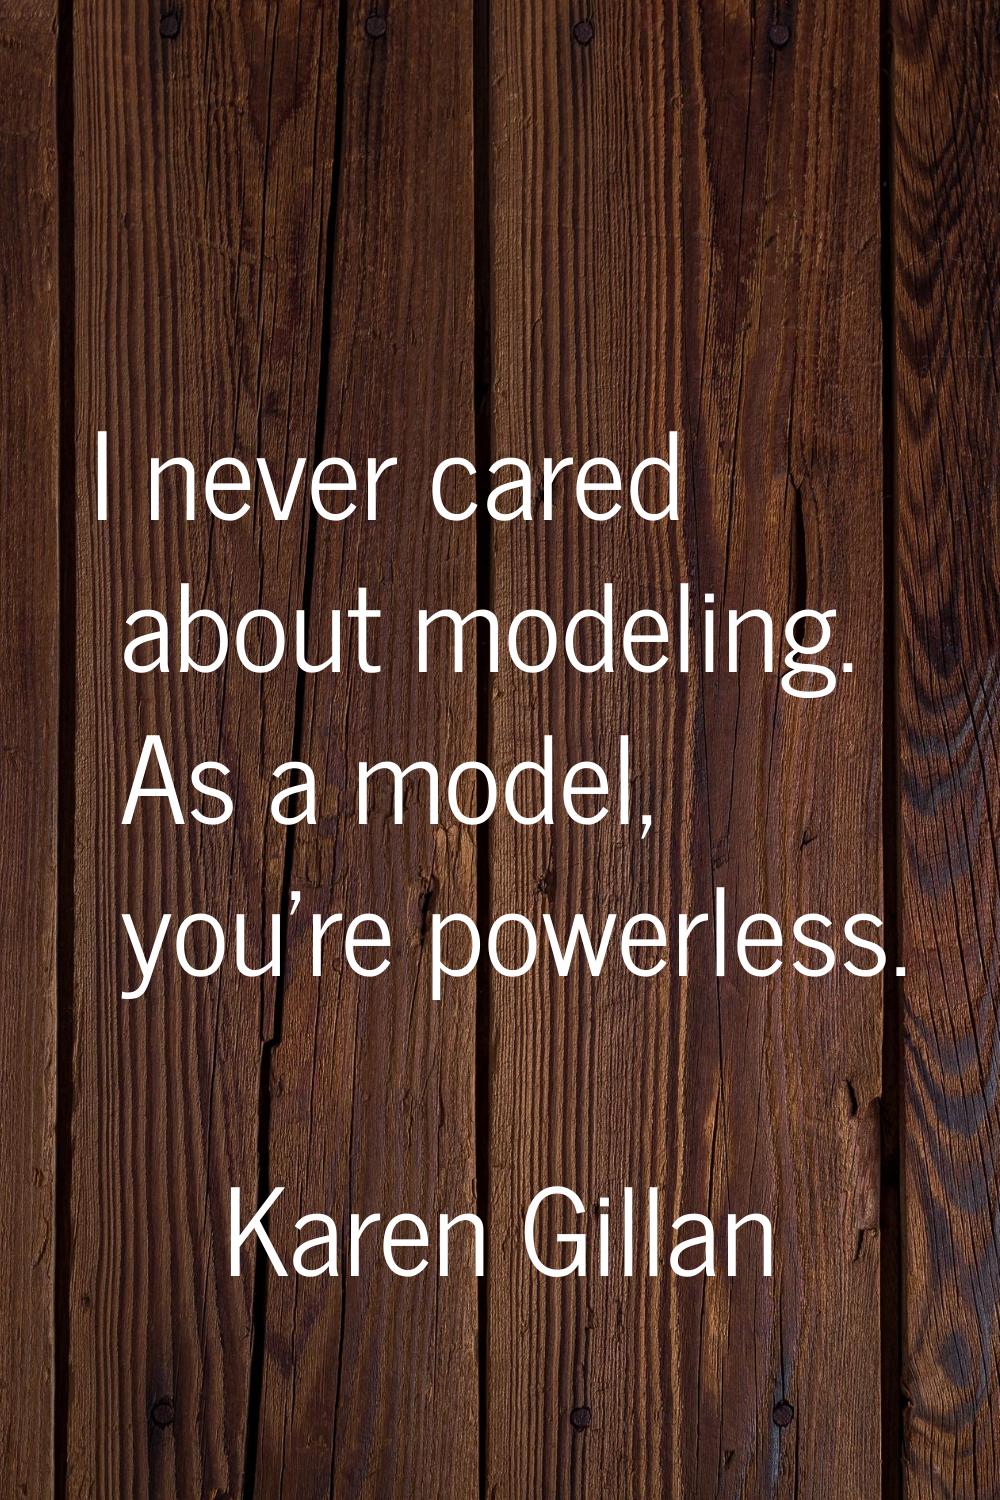 I never cared about modeling. As a model, you're powerless.